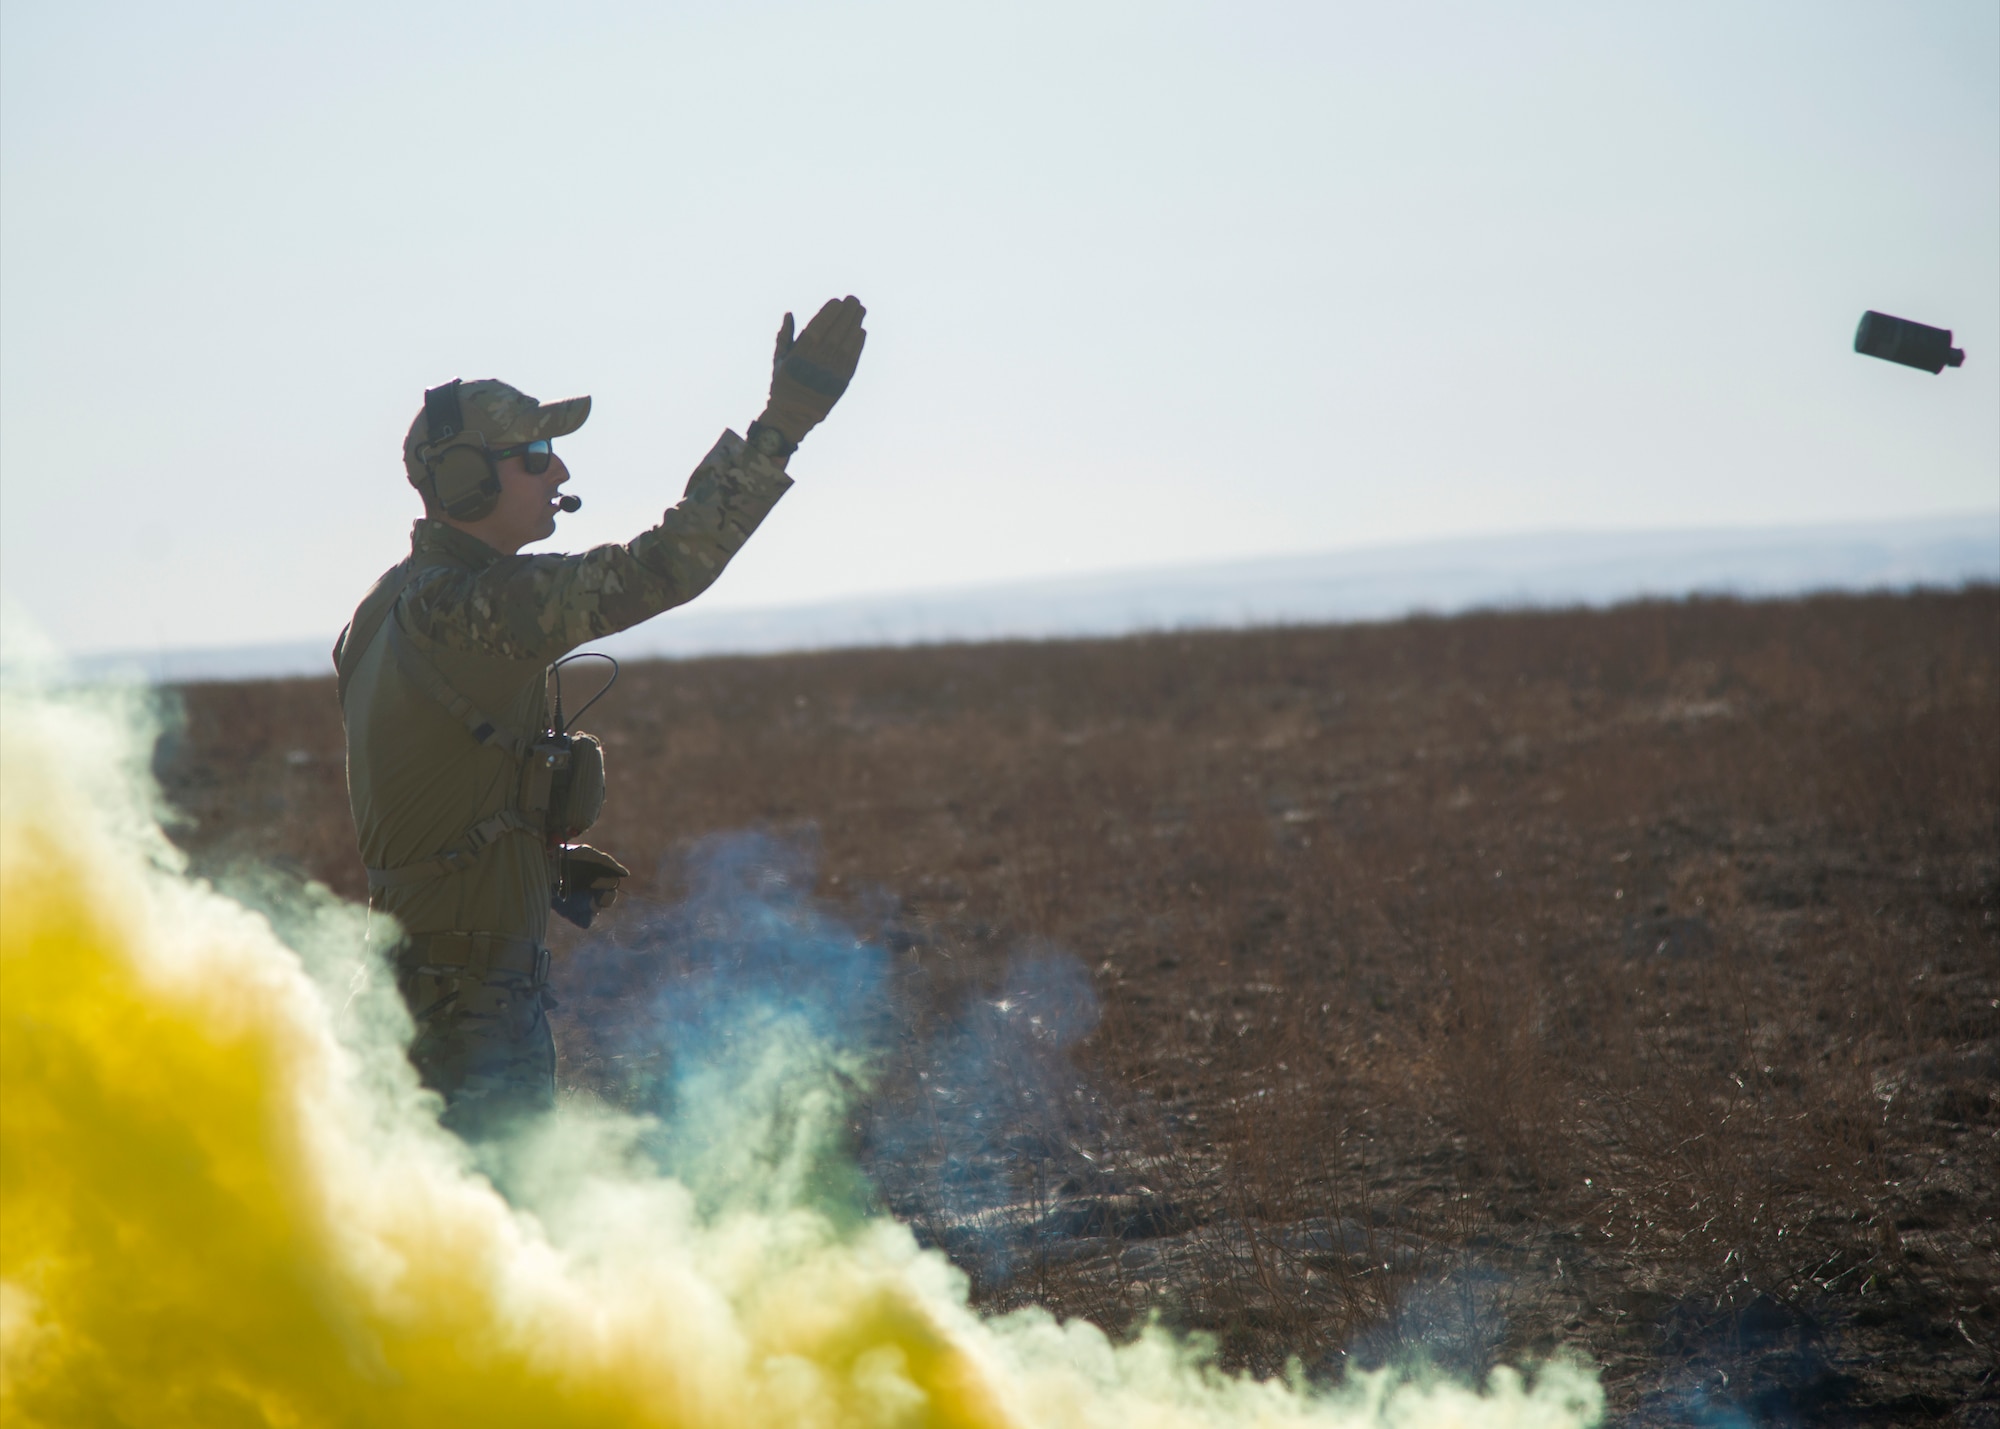 Staff Sgt. David Chorpeninng, 366th Fighter Wing survival, evasion, resistance and escape specialist, pops a M-18 smoke grenade Sept. 26, 2019, at Saylor Creek Bombing Range, Idaho.